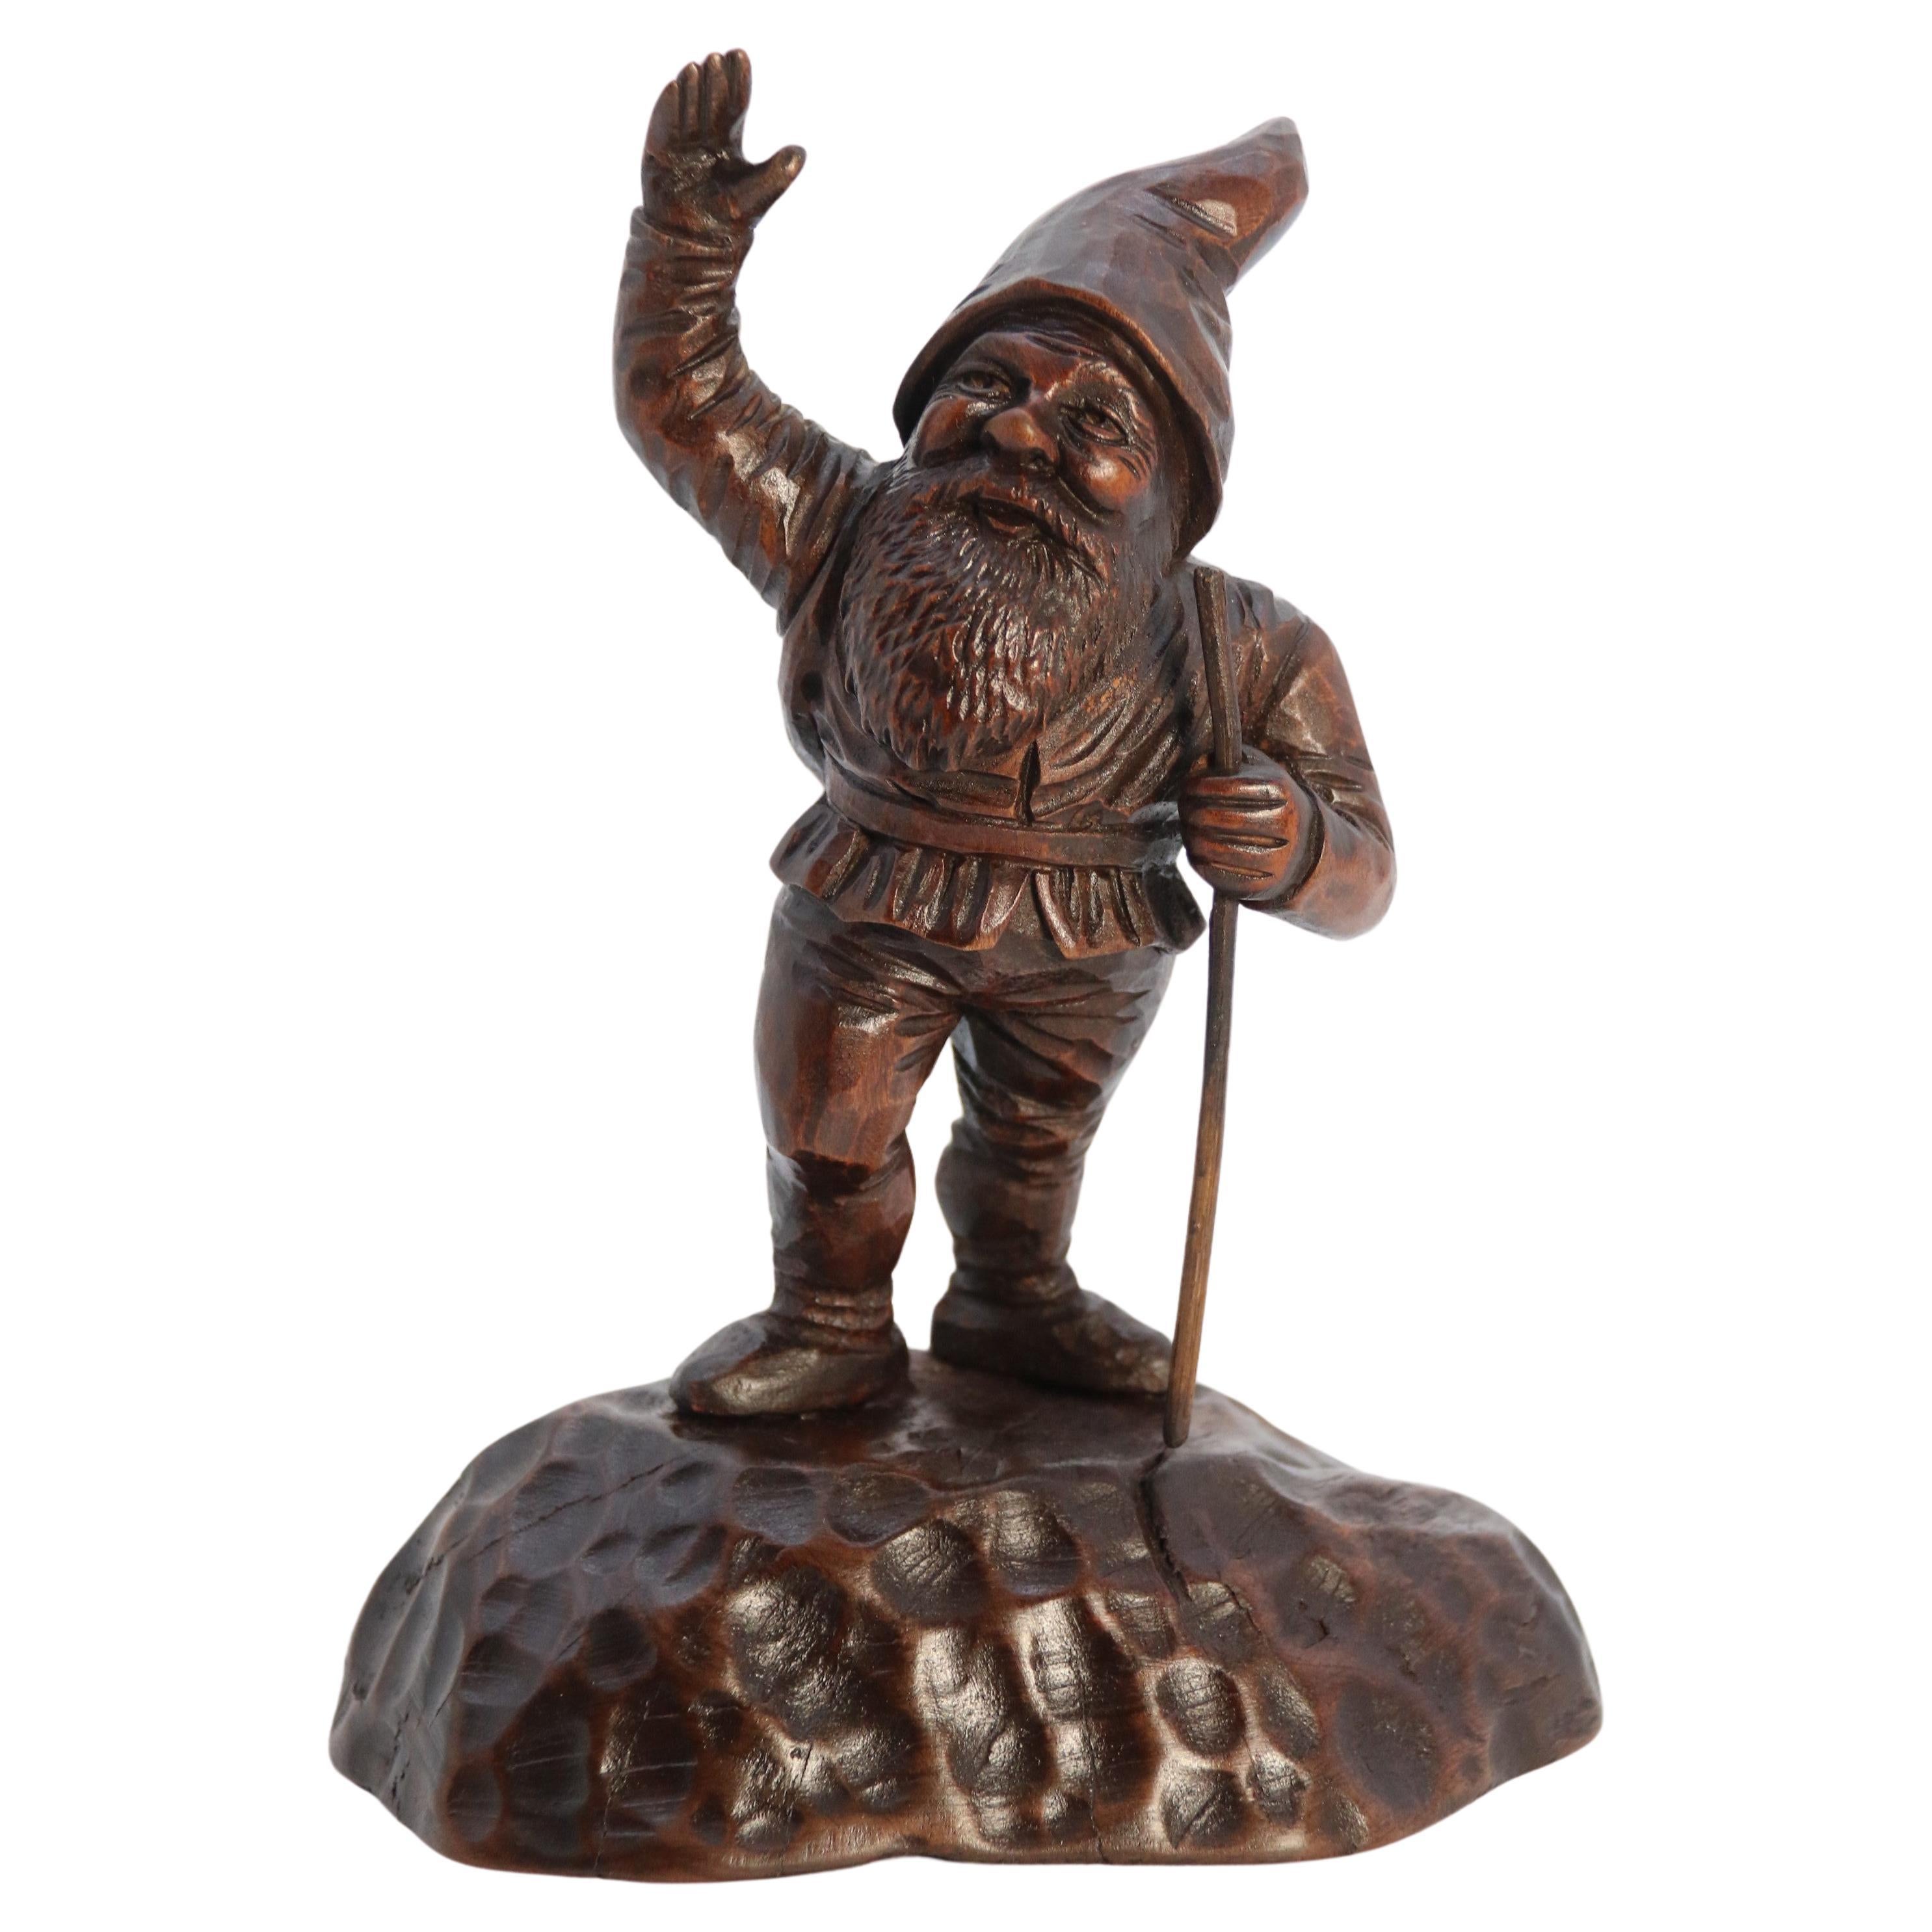 A late 19th century Black Forest carved walnut figure of a gnome circa 1900